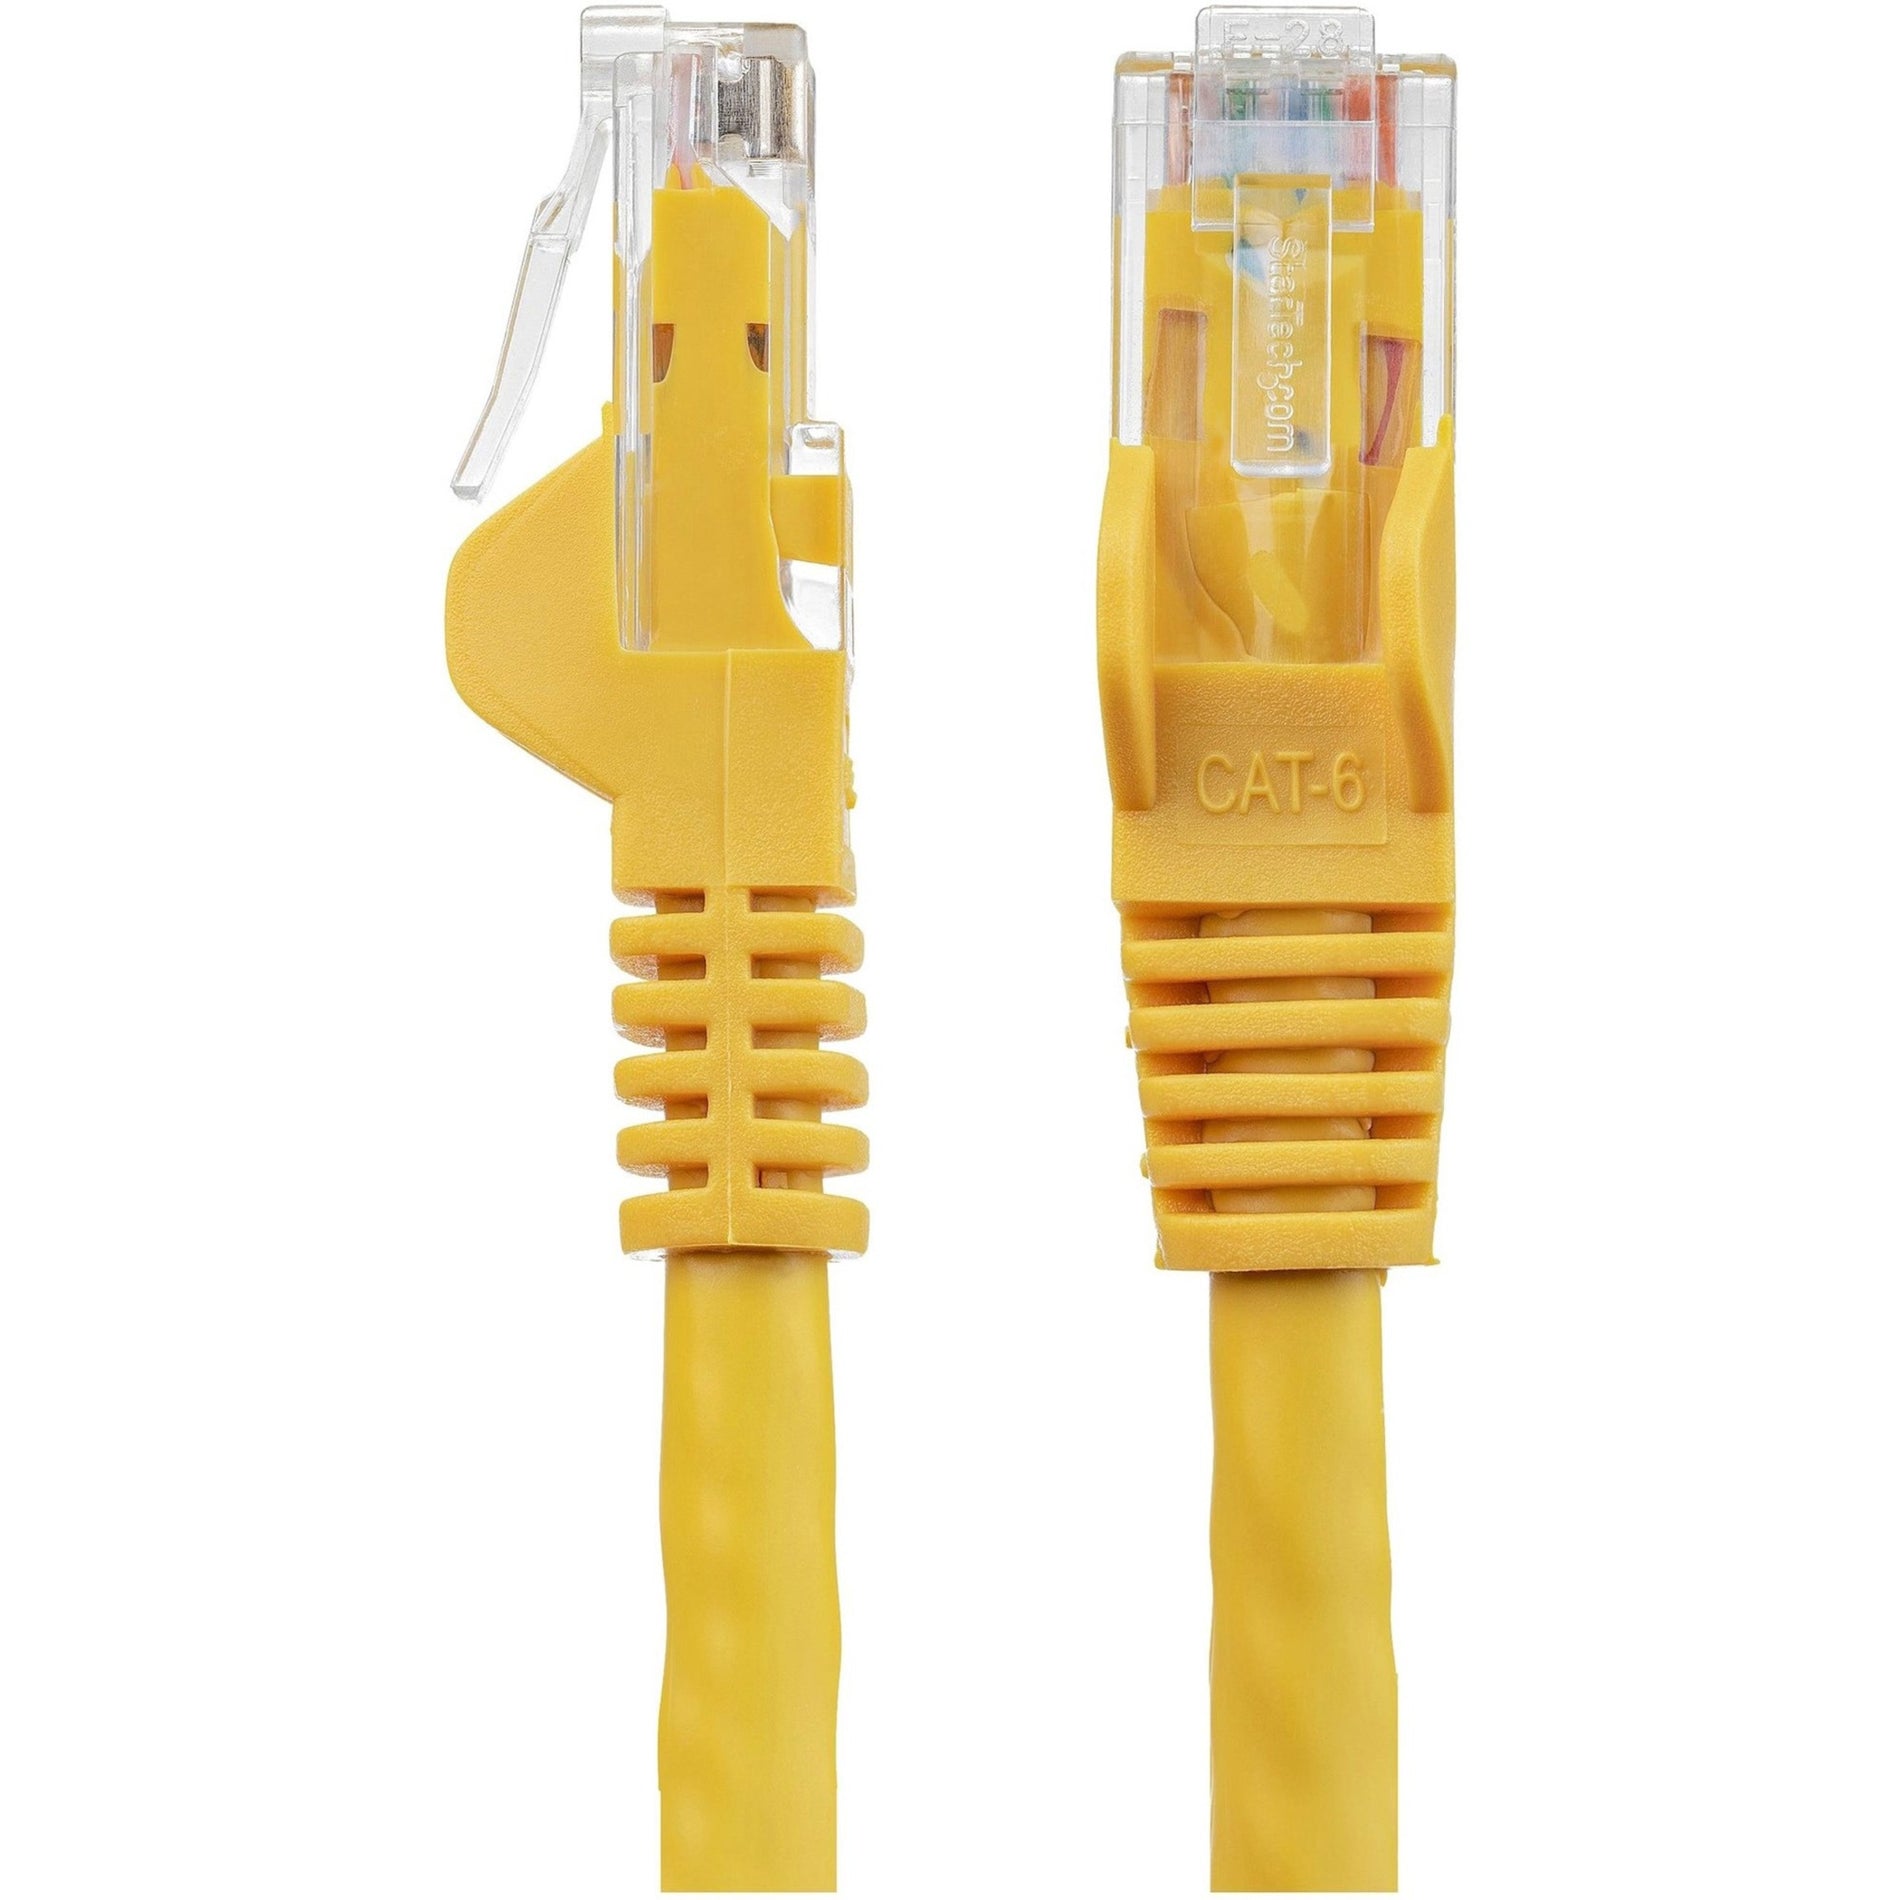 StarTech.com N6PATCH5YL Cat6 Patch Cable, 5ft Yellow Ethernet Cable, Snagless RJ45 Connectors